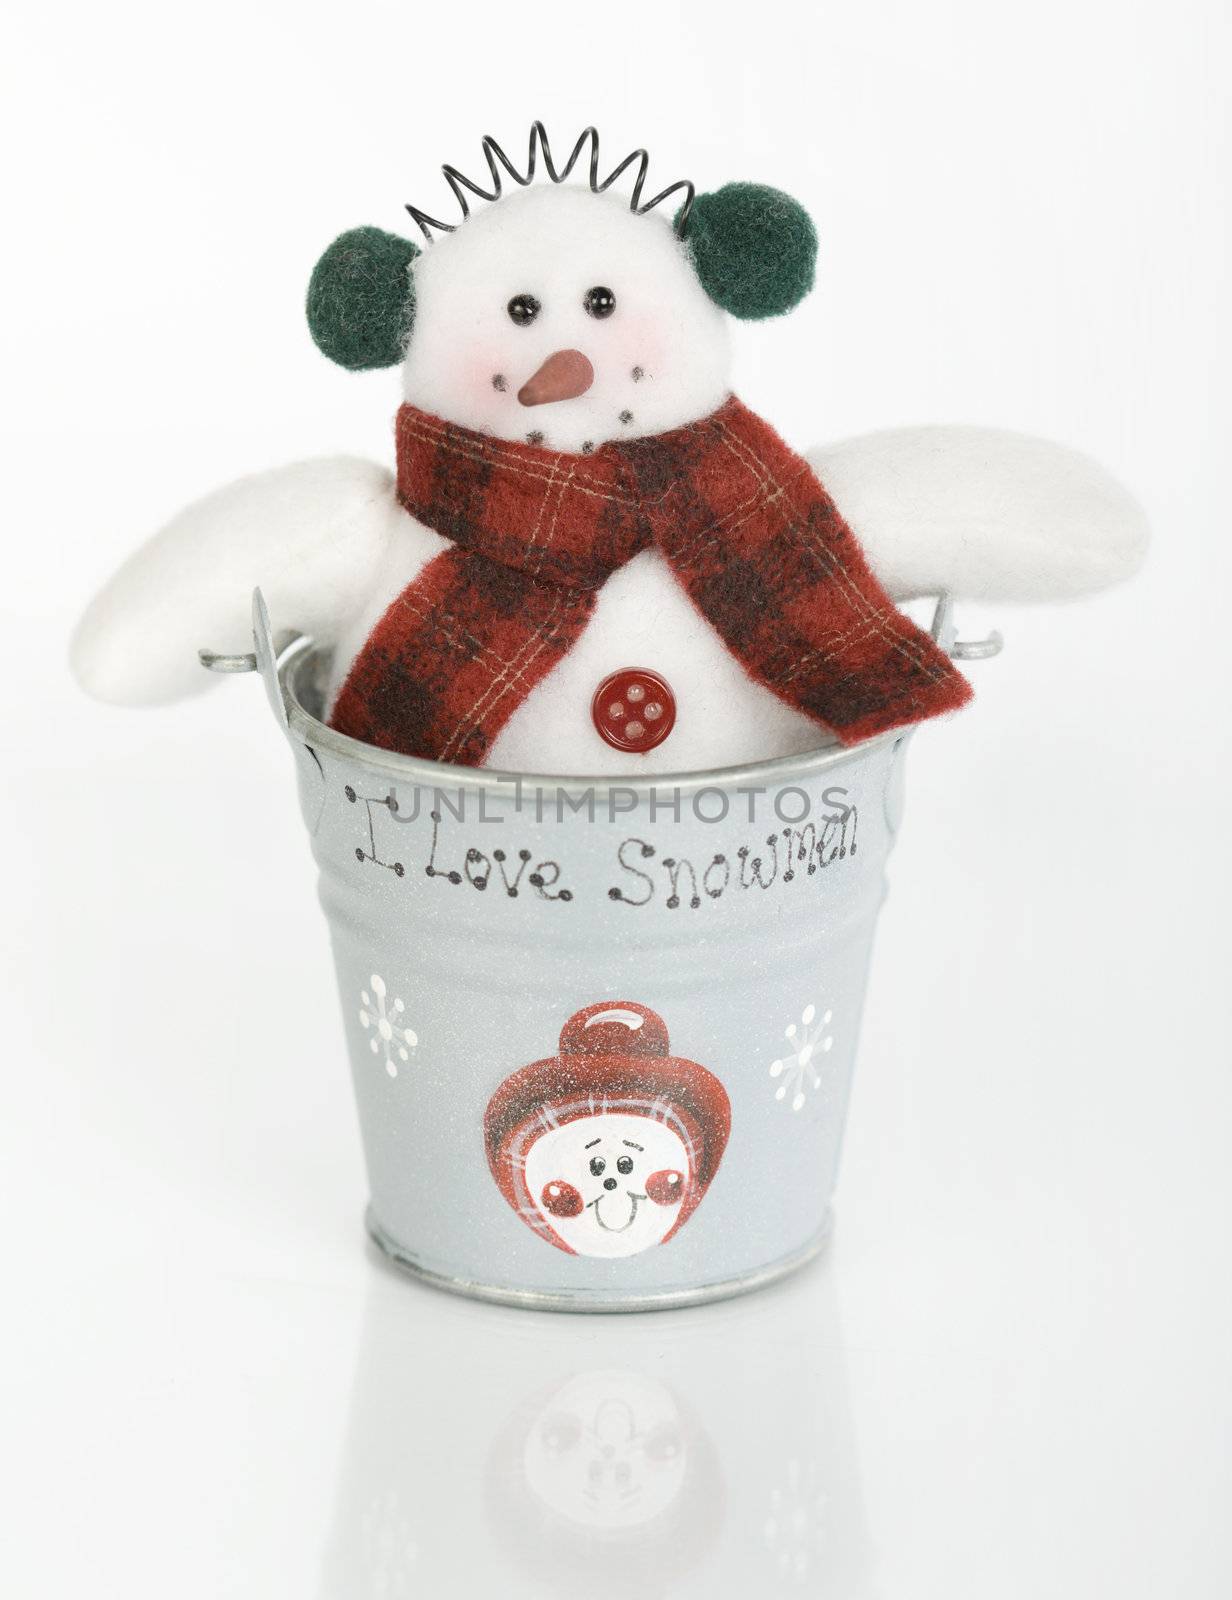 Cheerful snowman wearing scarf and ear muffs